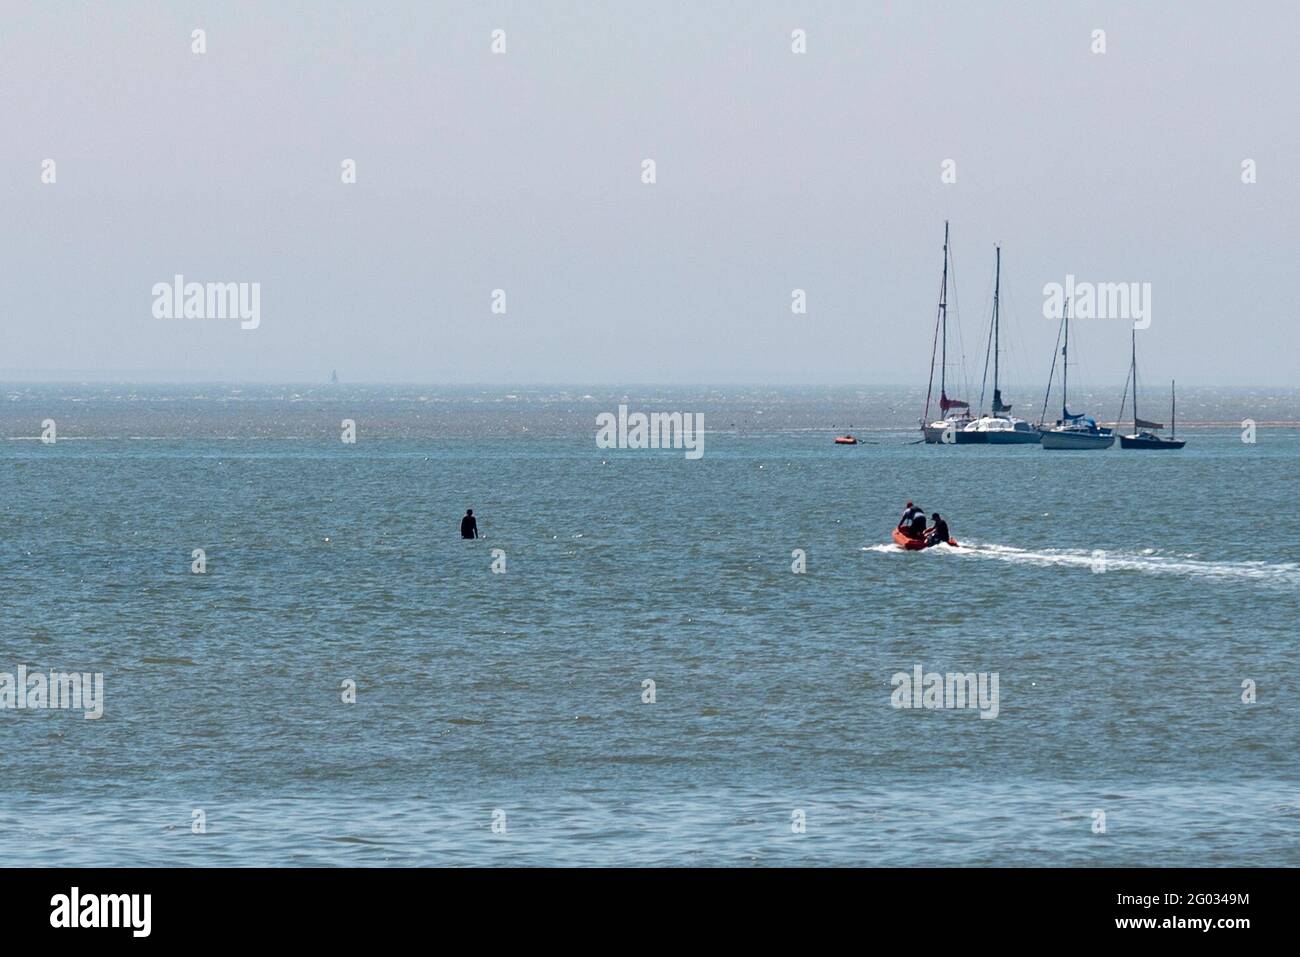 Southend on Sea, Essex, UK. 31st May, 2021. The warm sunny weather has attracted people to the seaside town on Bank Holiday Monday. A young male was caught out by the incoming tide resulting in being picked up firstly by a local boat then transferred to the RNLI hovercraft Stock Photo